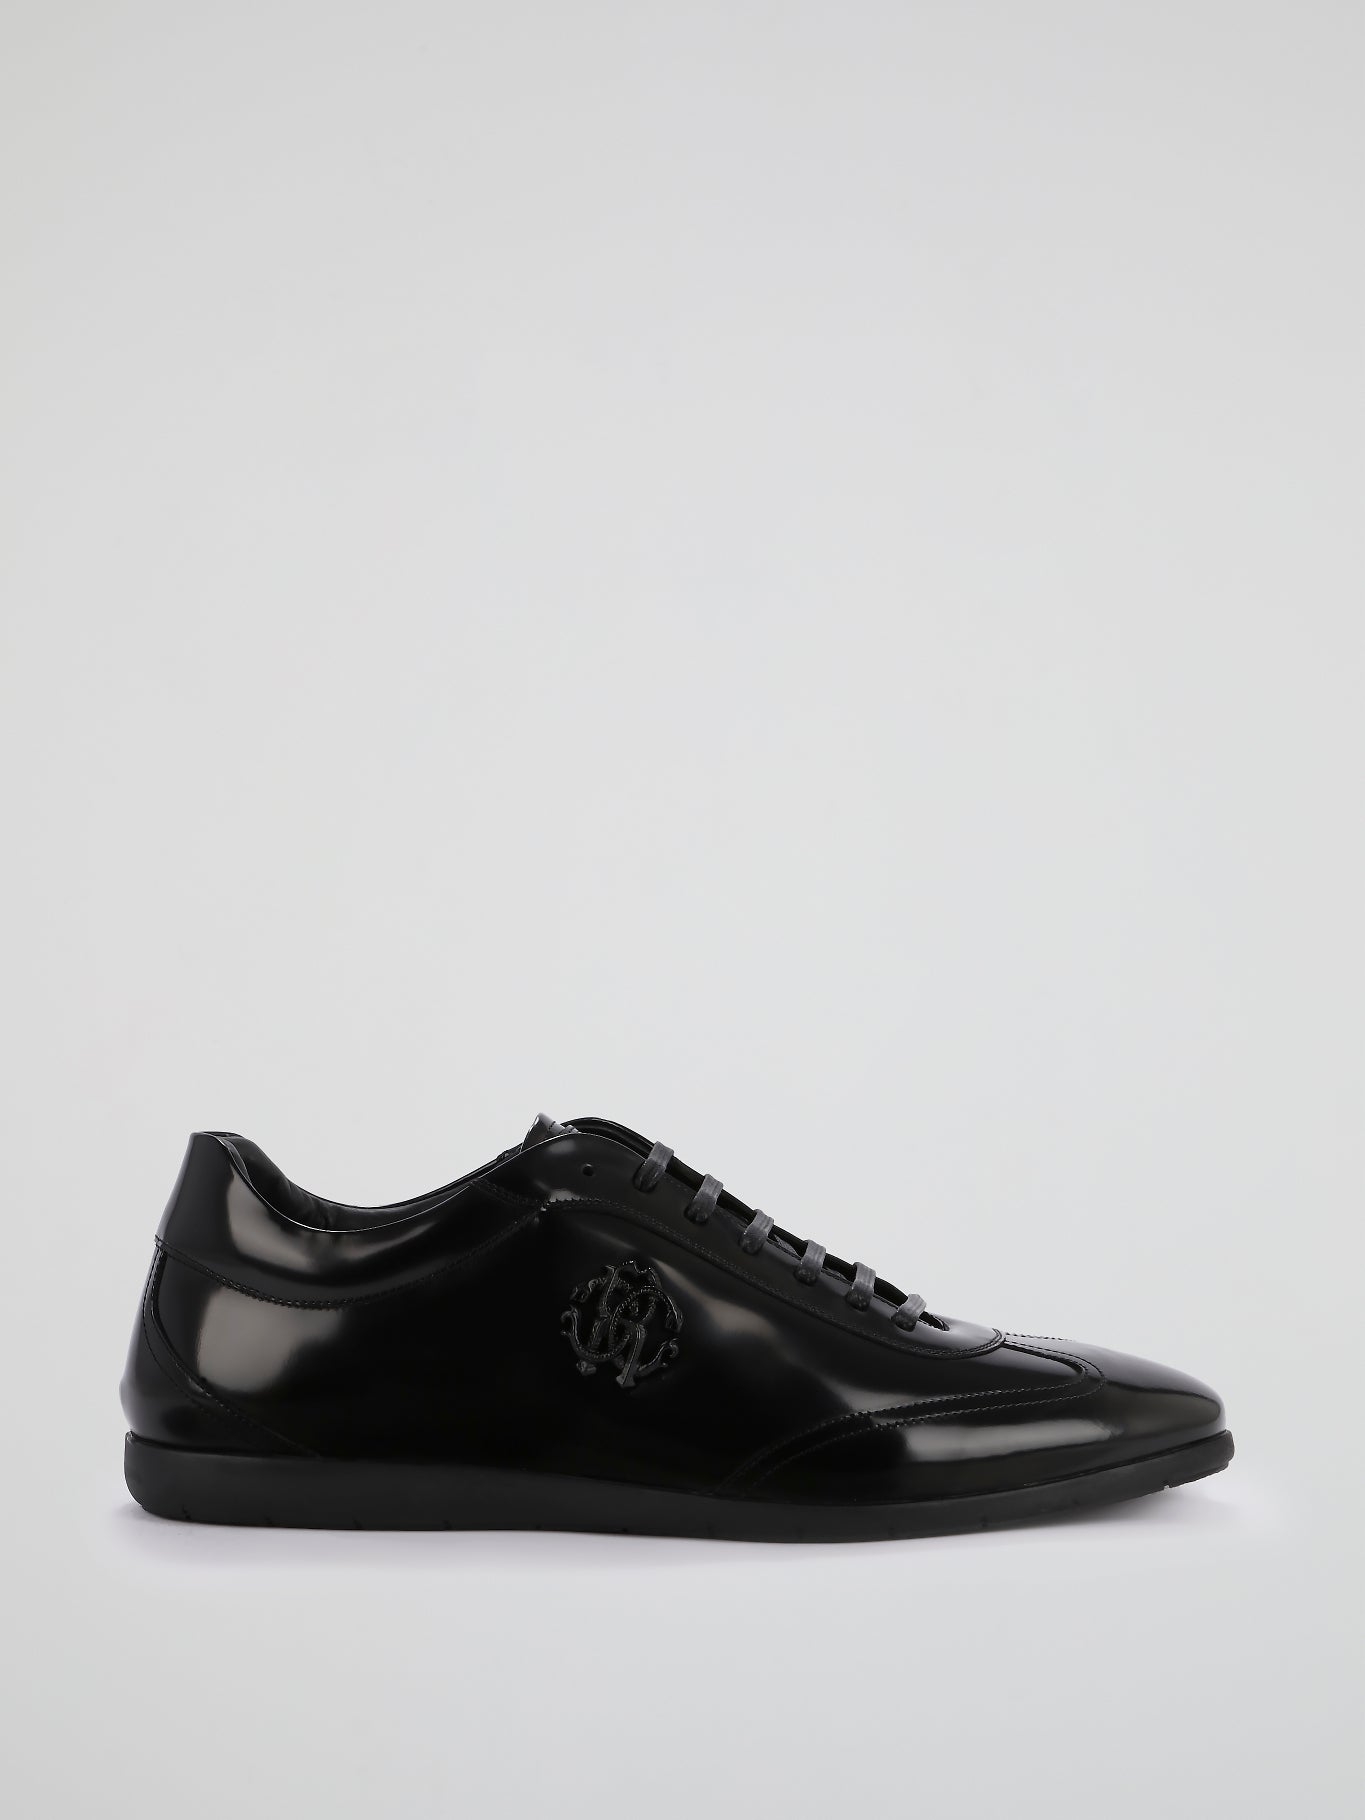 Black Patent Leather Sneakers